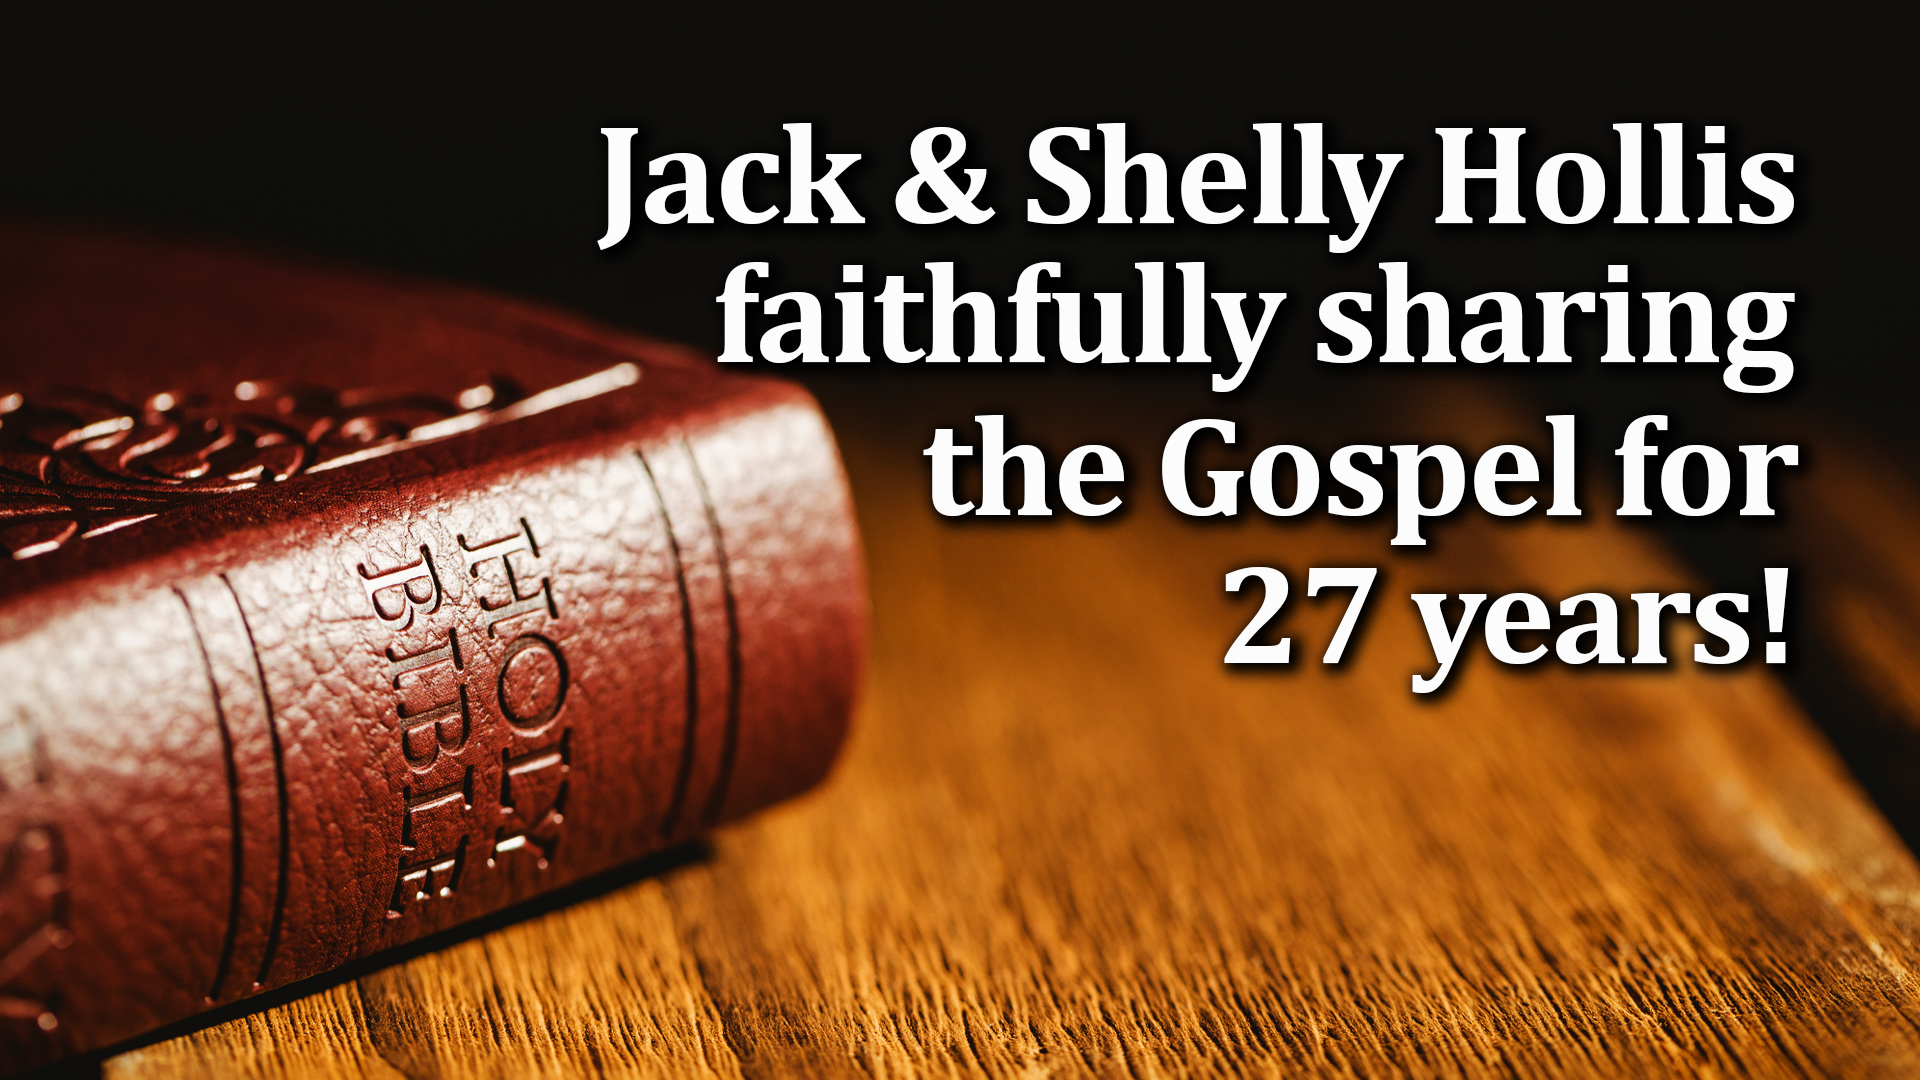 11-23-21 Jack and Shelly Hollis Sharing Gospel 27 years